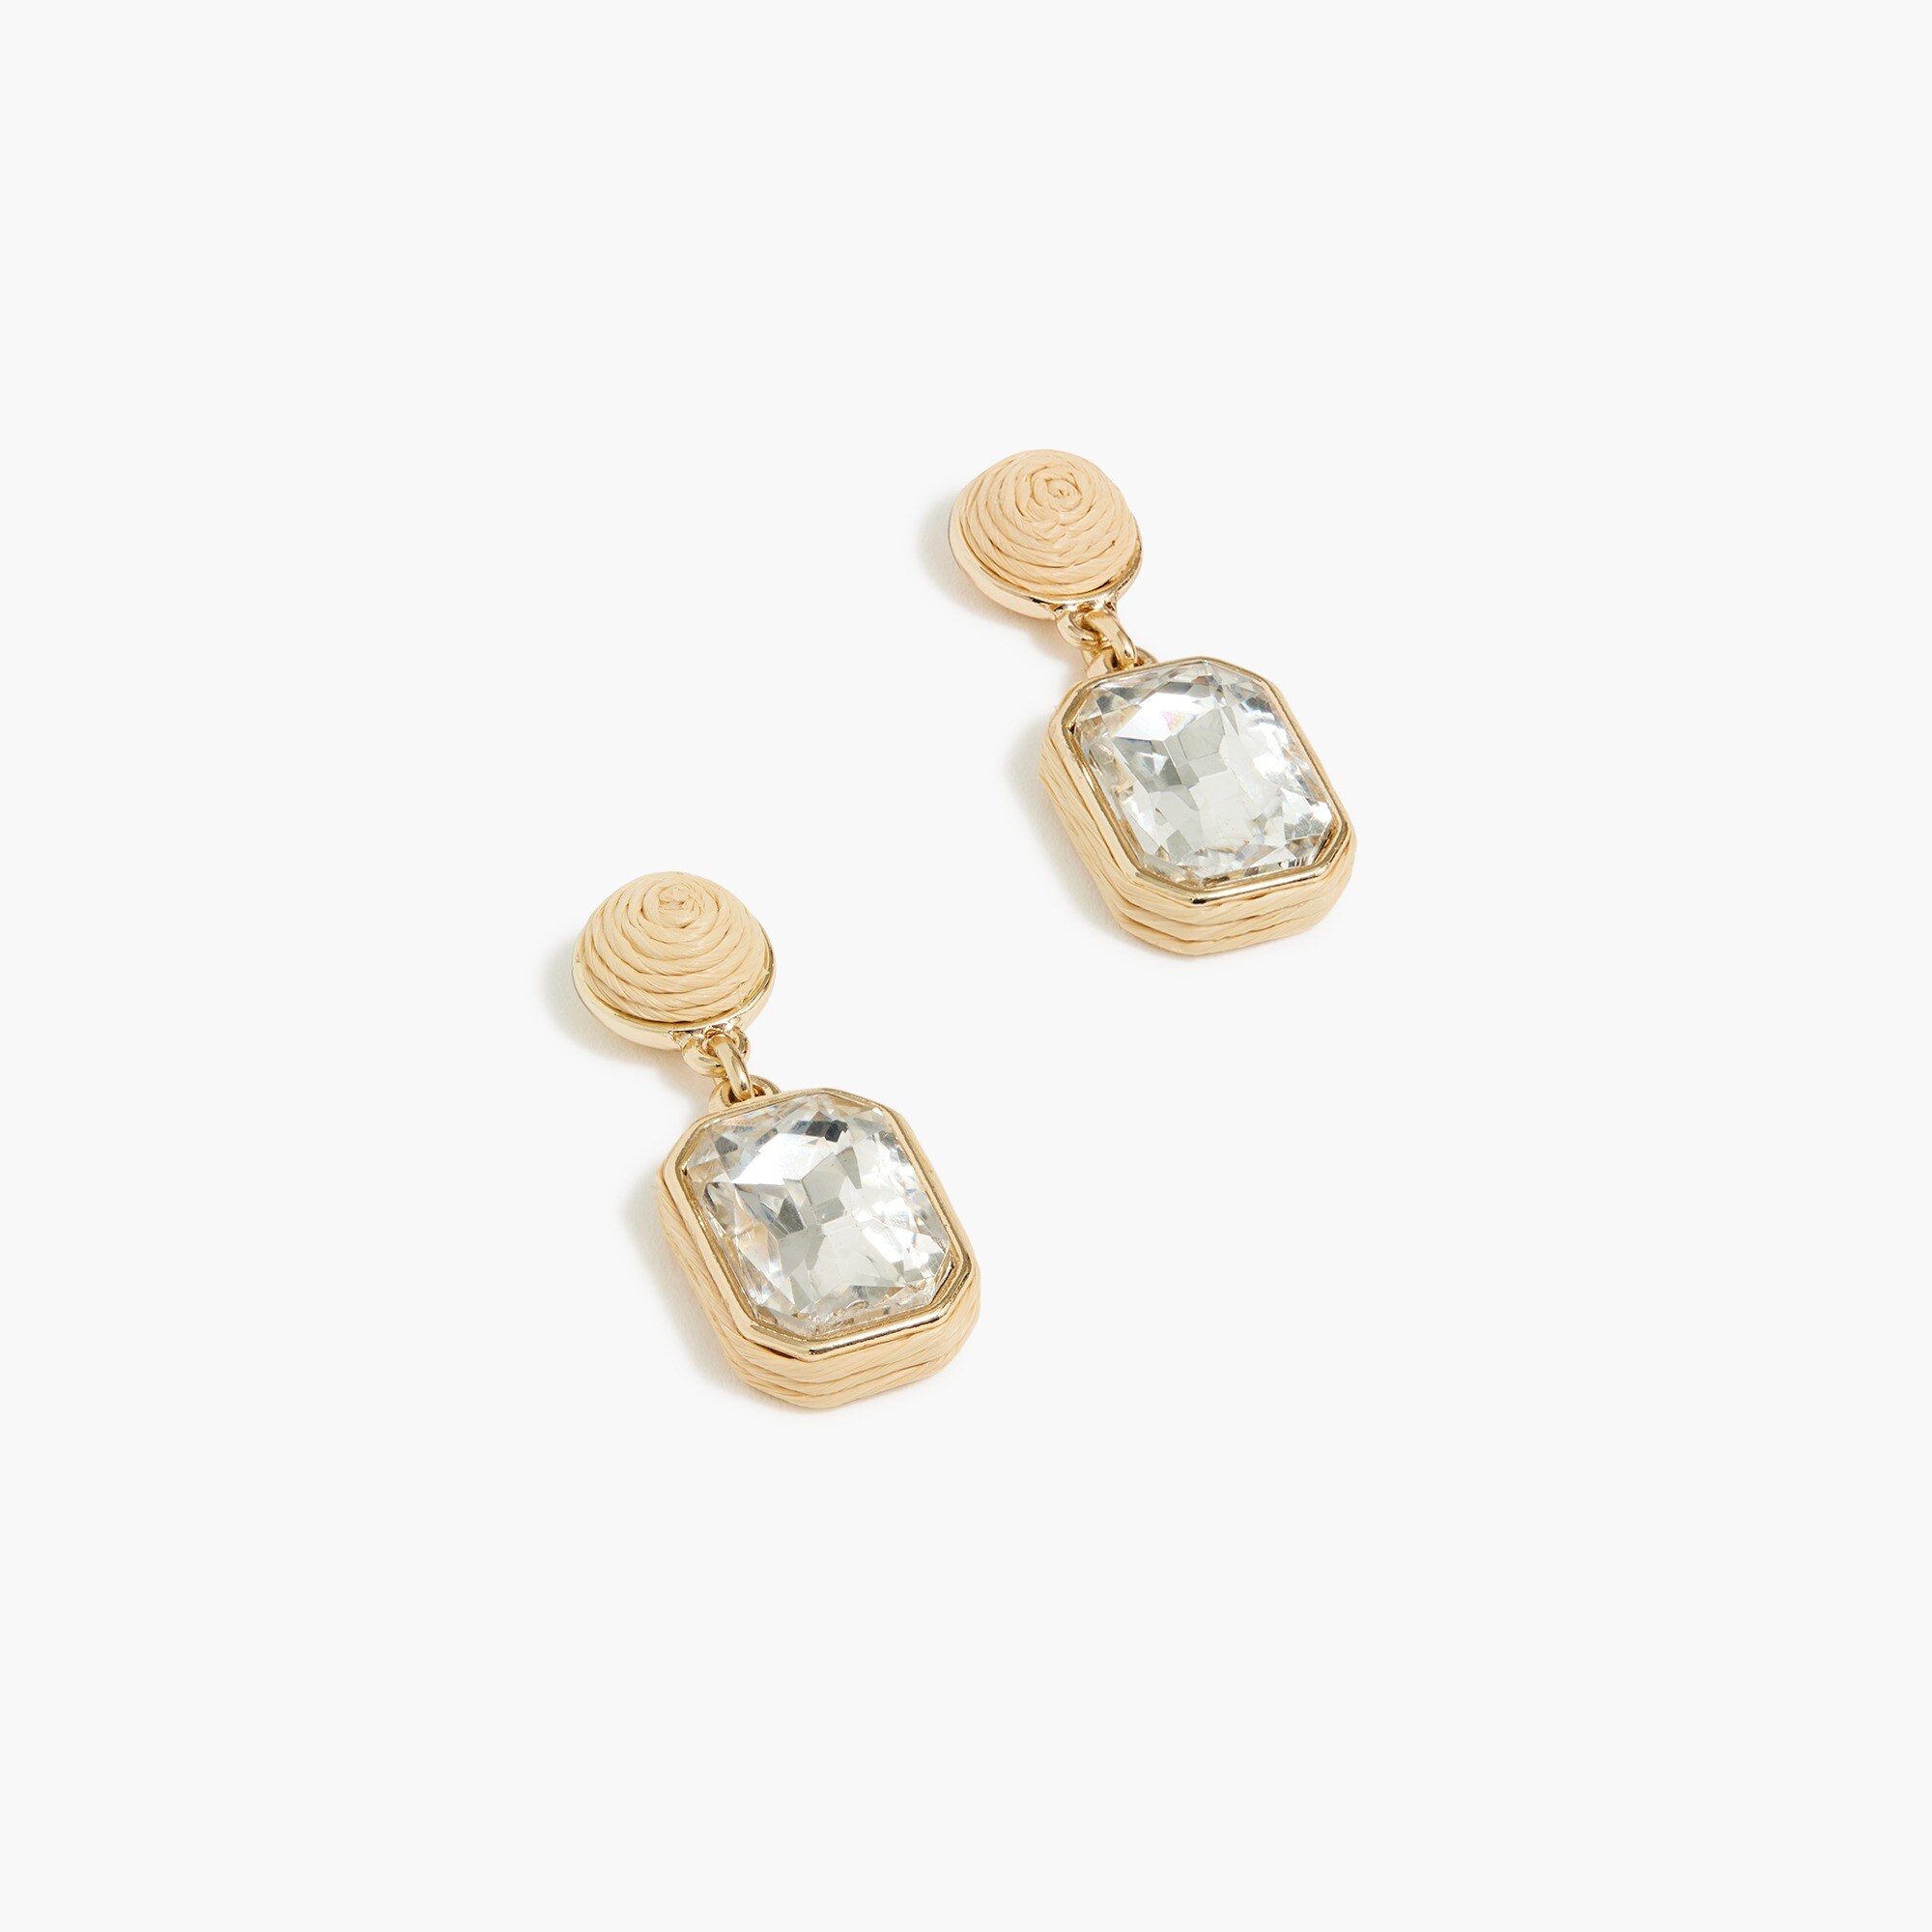  Crystal and woven straw statement earrings